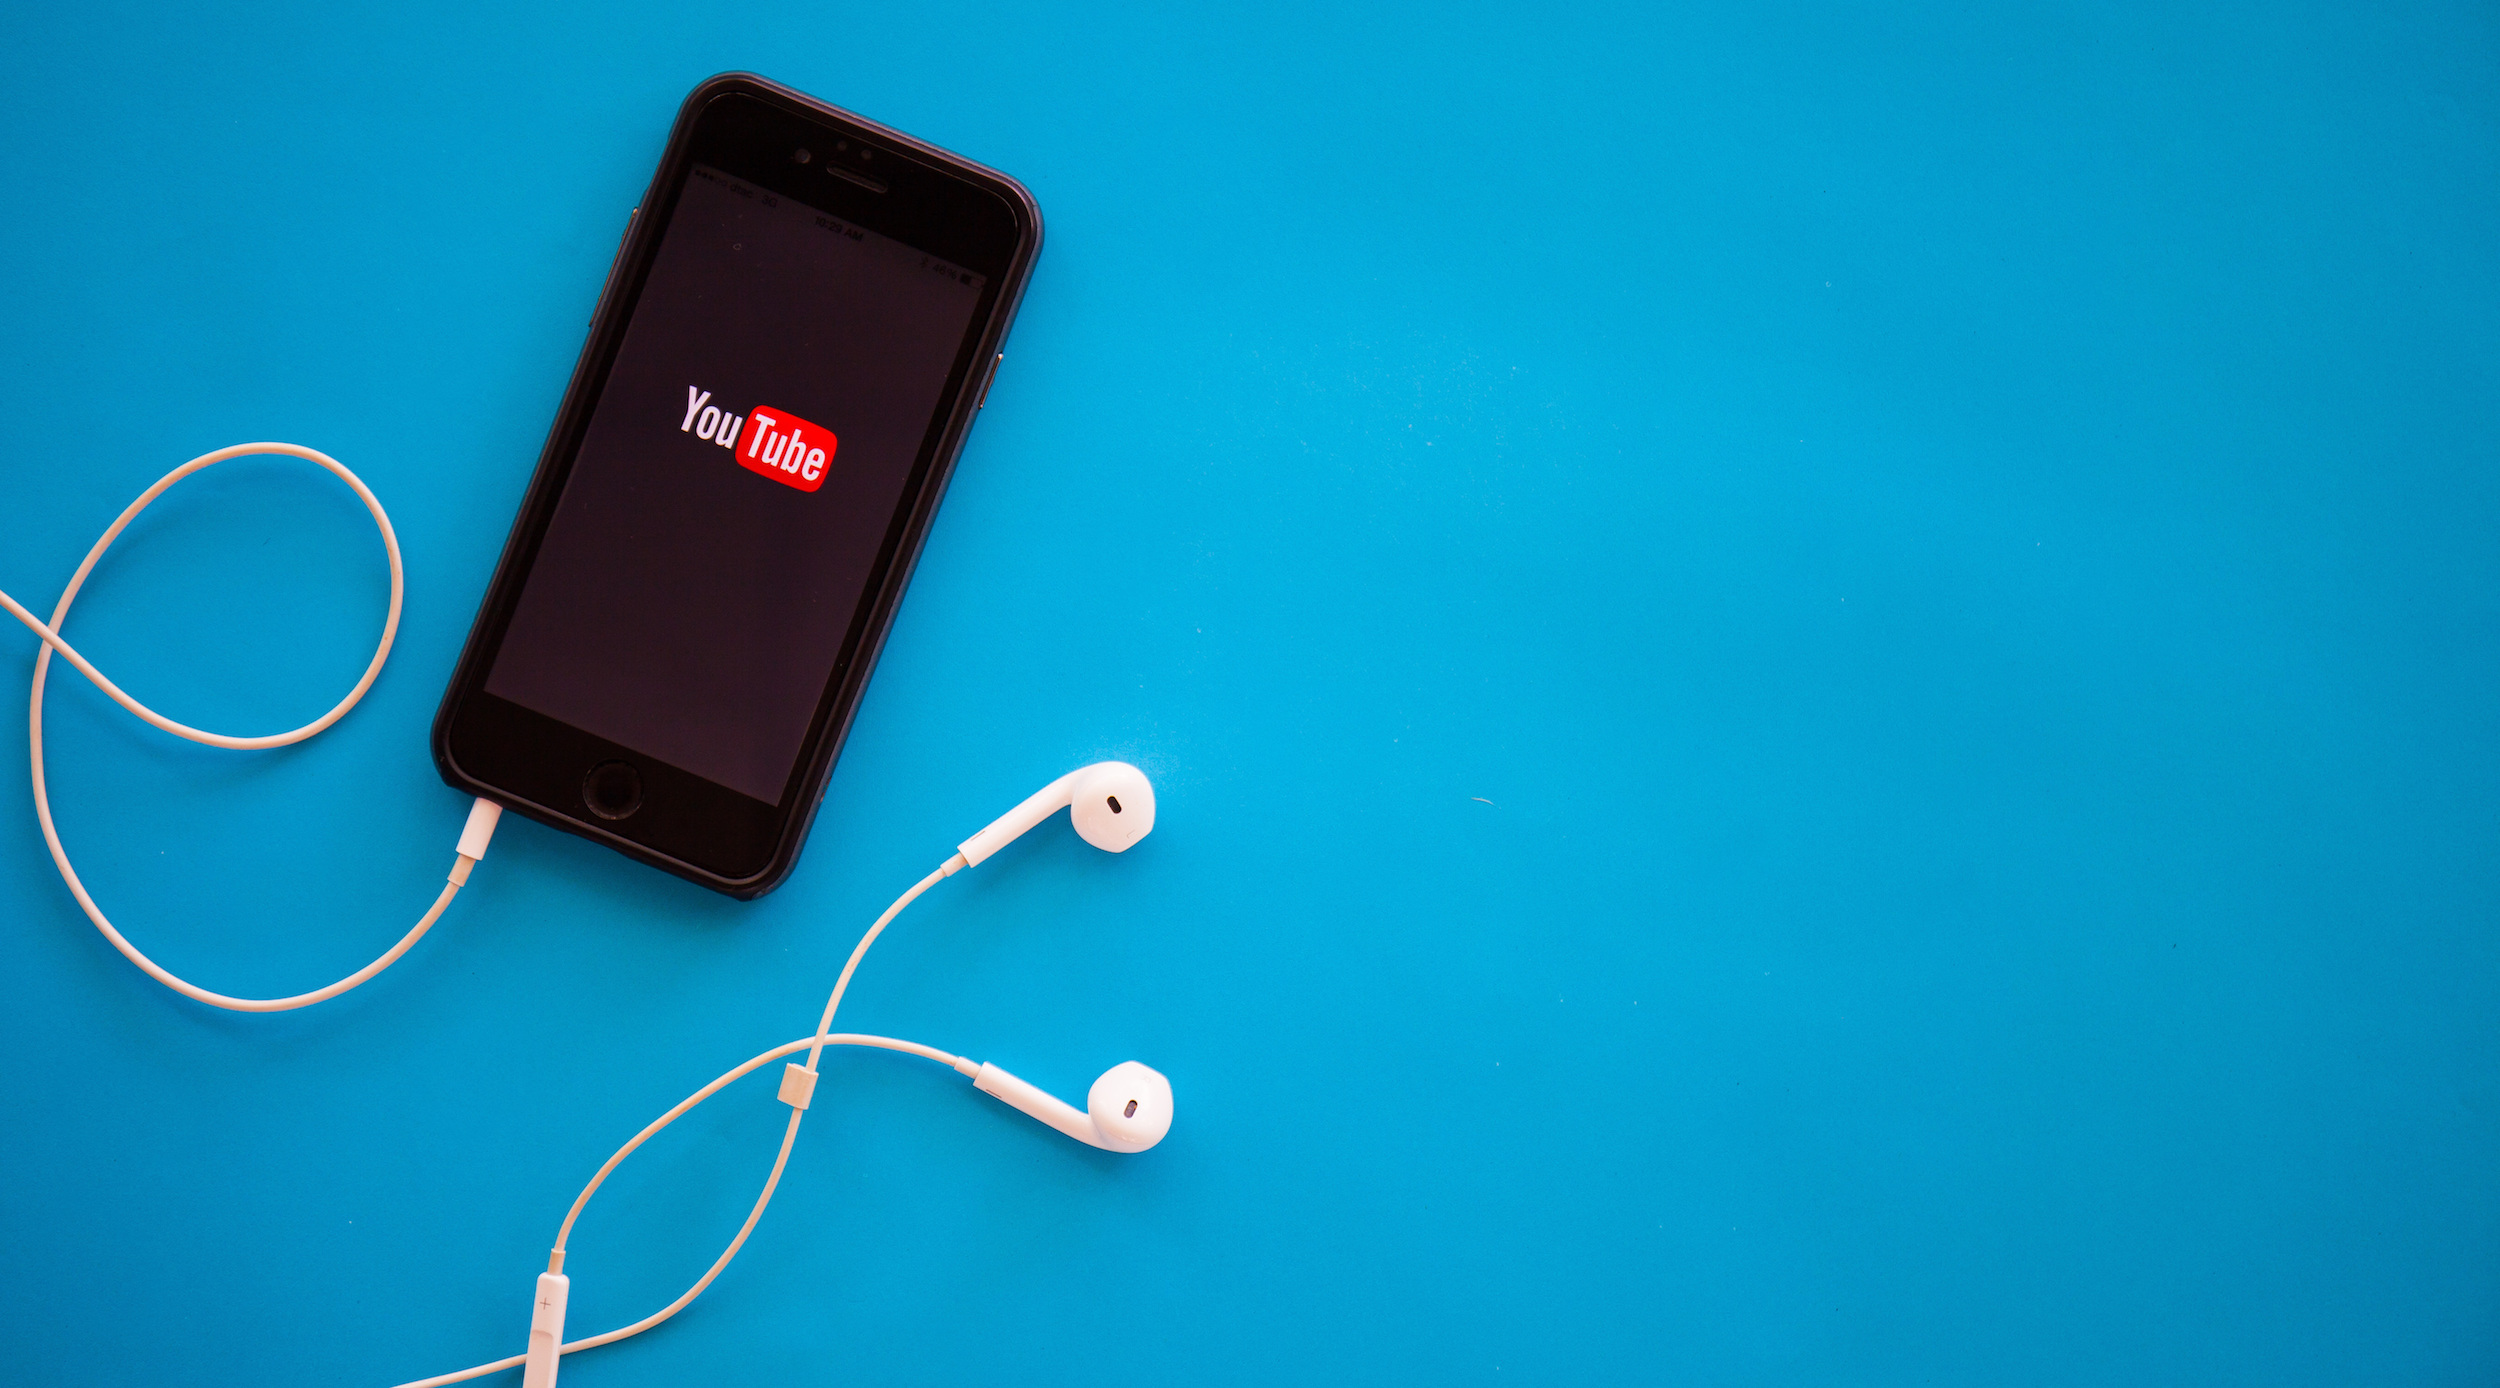 Australia among first five countries to get new YouTube Music service next week